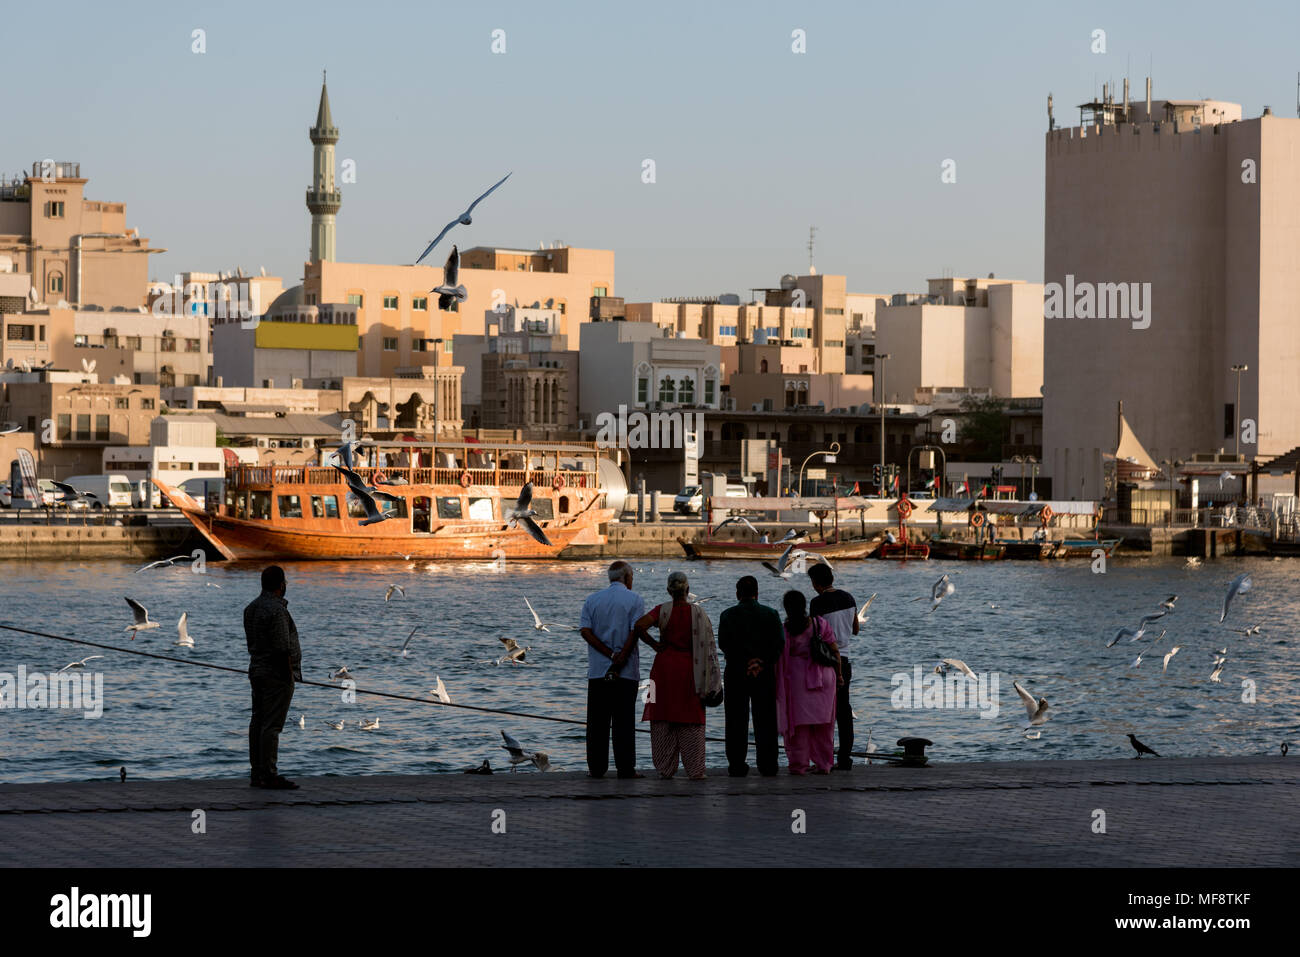 Dubai Creek  is a saltwater creek located in Dubai, United Arab Emirates (UAE).  Dhows used for purposes of fishing were also built on the foreshore o Stock Photo